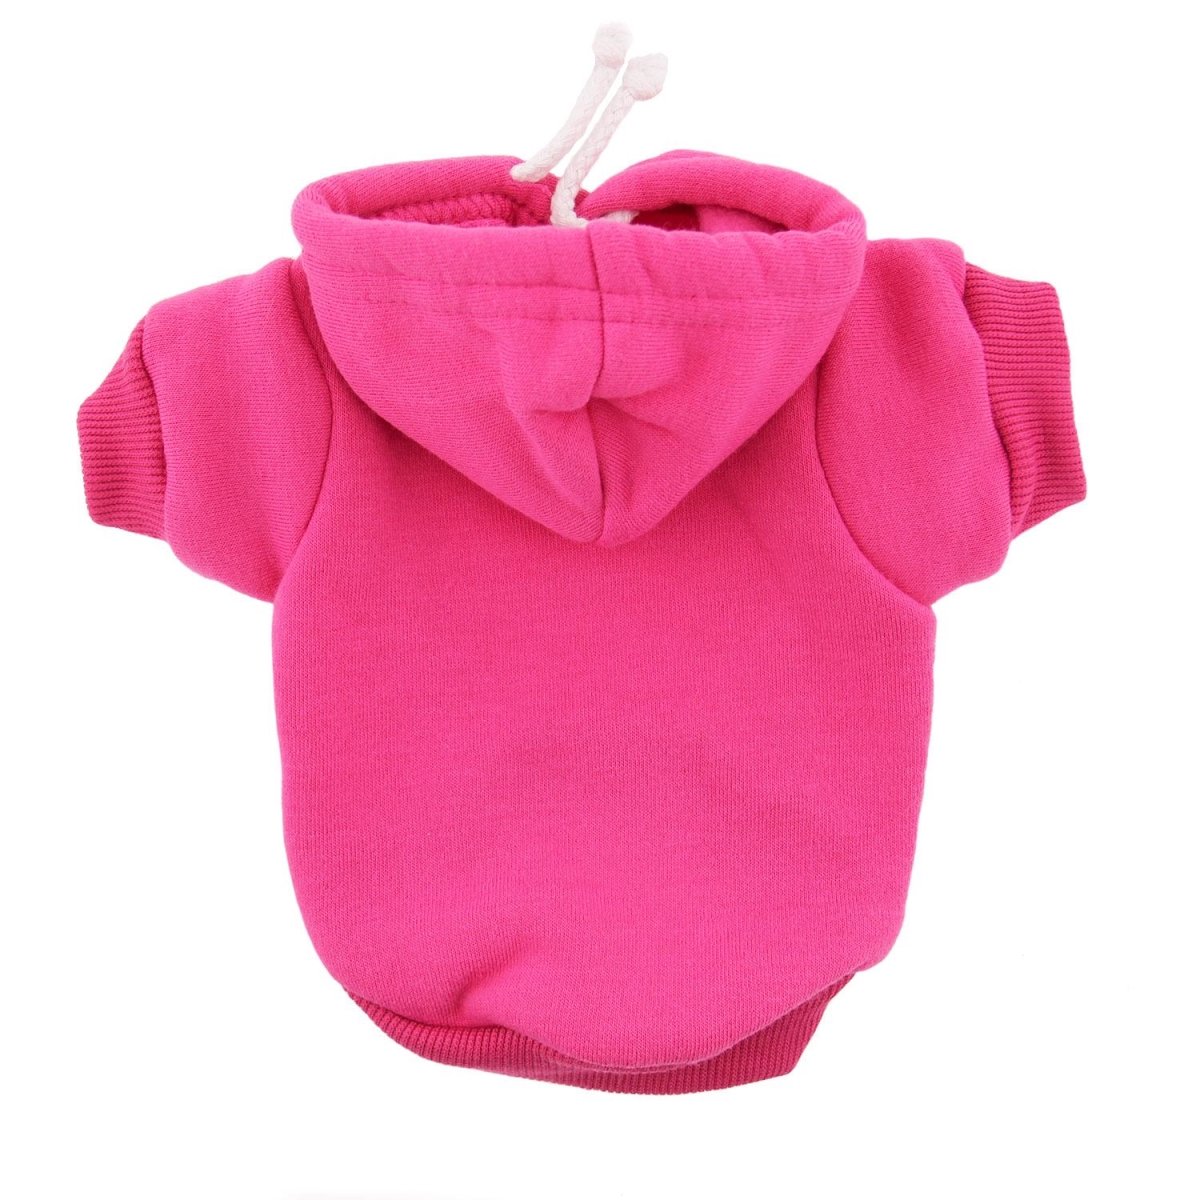 Plain Dog Hoodie, Bright Pink - Extra Small